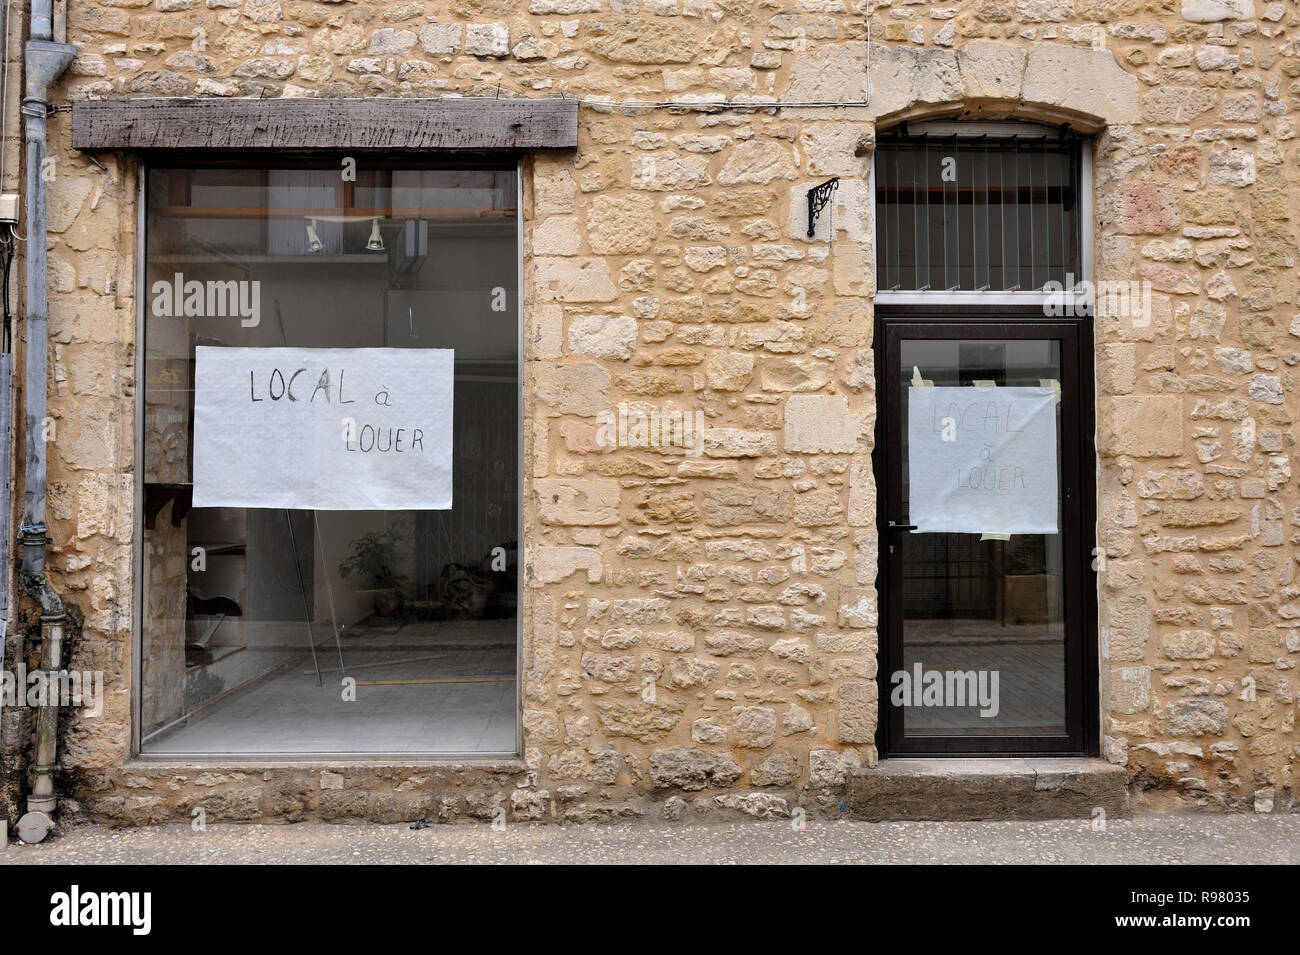 Shop to let in small village in France. (text on window in French 'Local a louer' means shop to let) Stock Photo